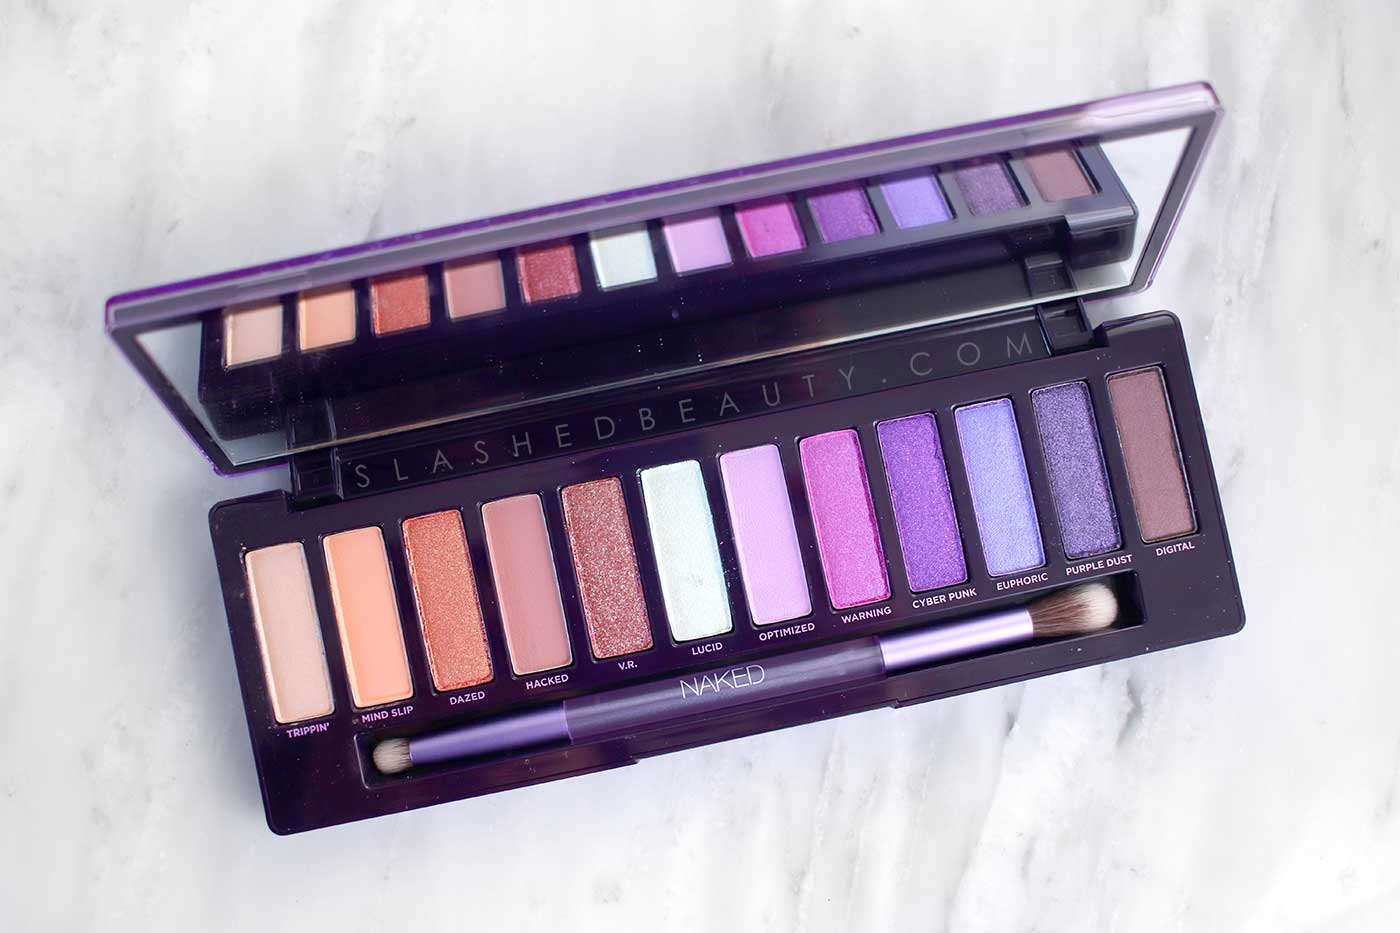 NEW Urban Decay Naked Ultraviolet Palette Review & Swatches | Slashed Beauty